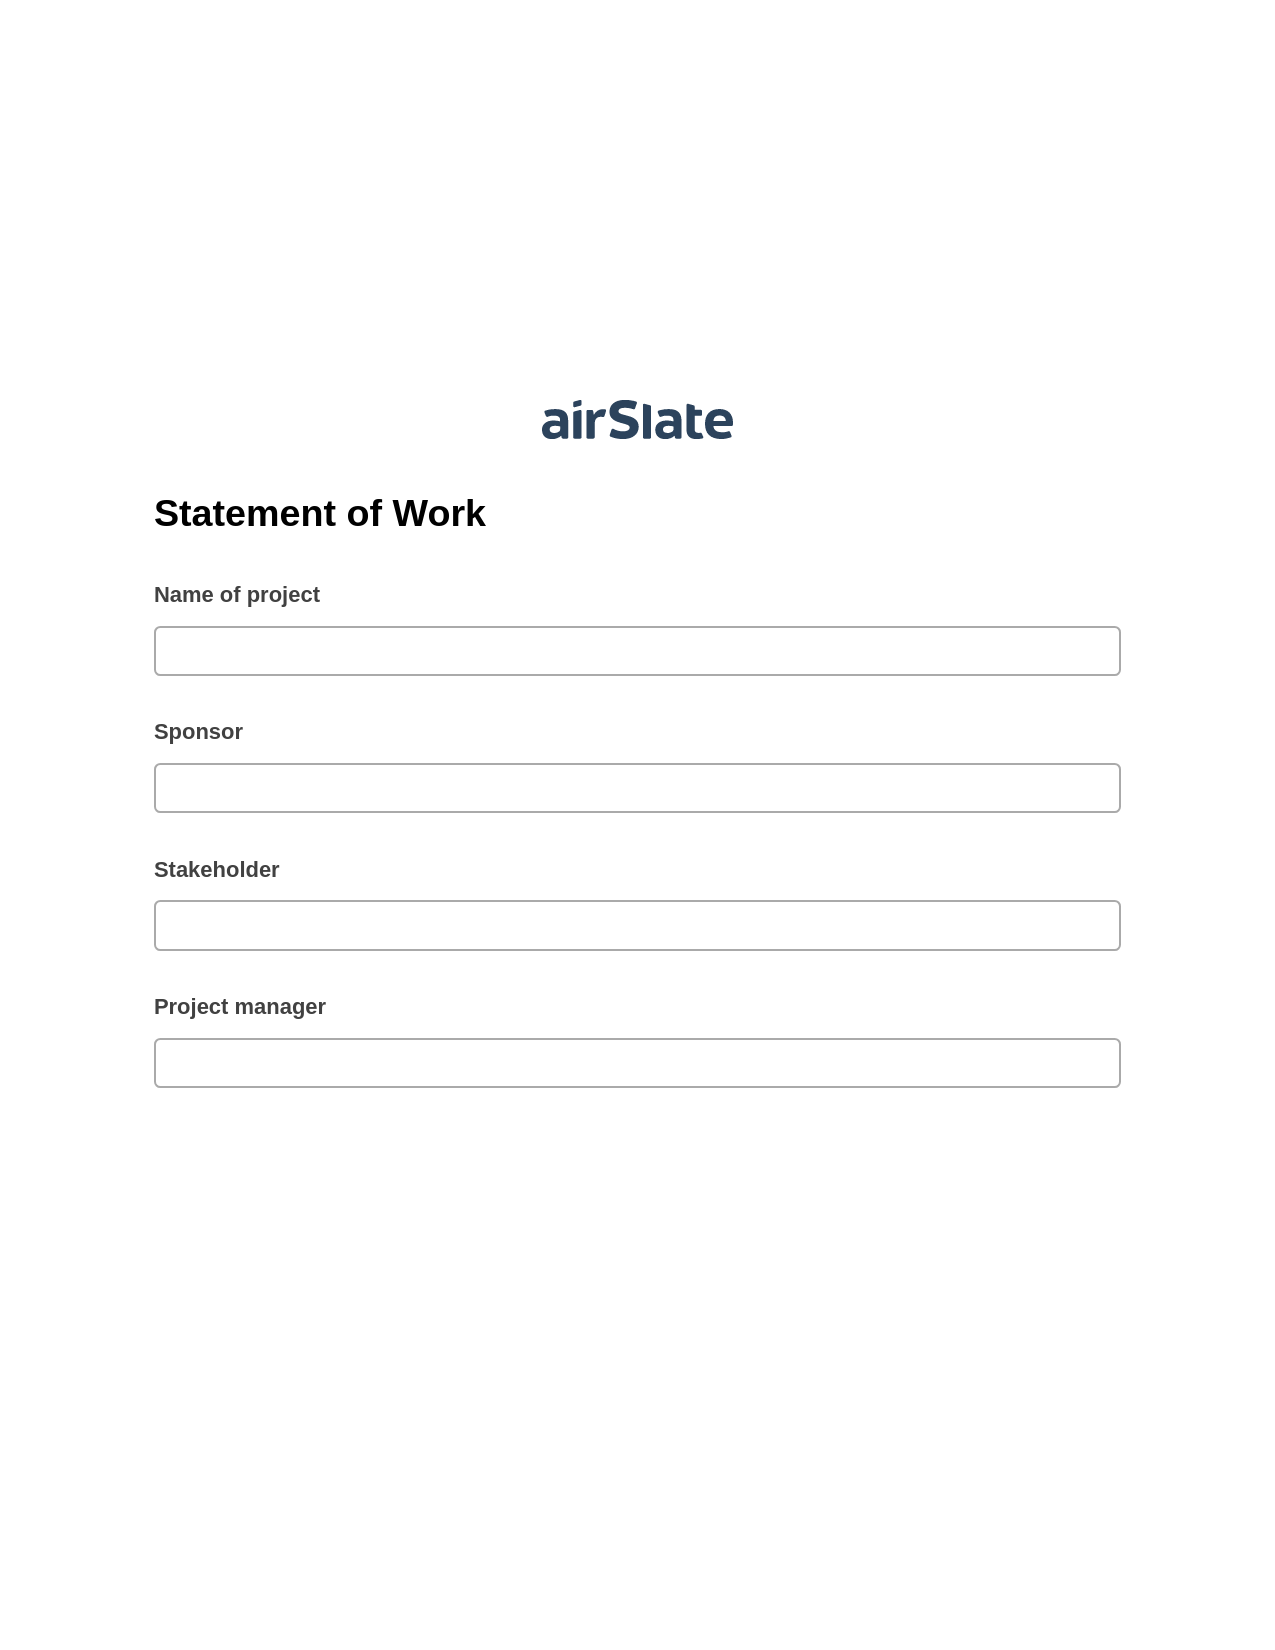 Multirole Statement of Work Pre-fill Document Bot, Add Tags to Slate Bot, Export to MySQL Bot